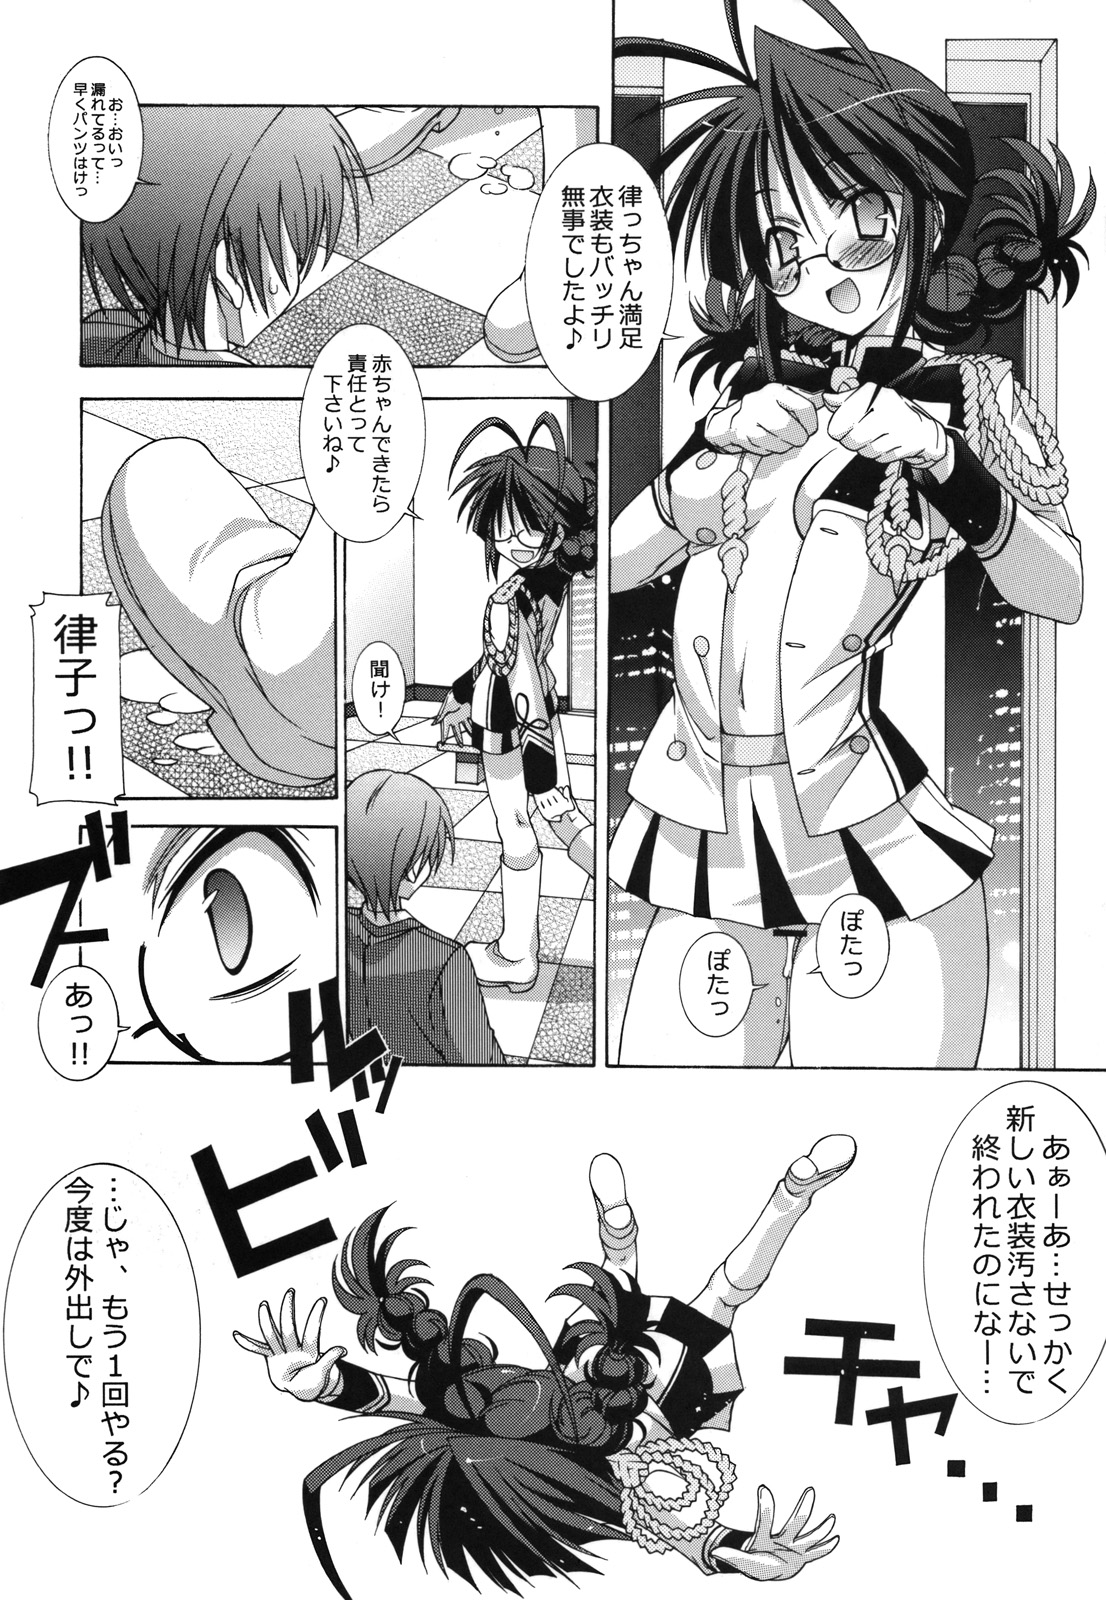 (C74) [Chuuni+OUT OF SIGHT] M@STER OF PUPPETS 04 (idolmaster) page 19 full